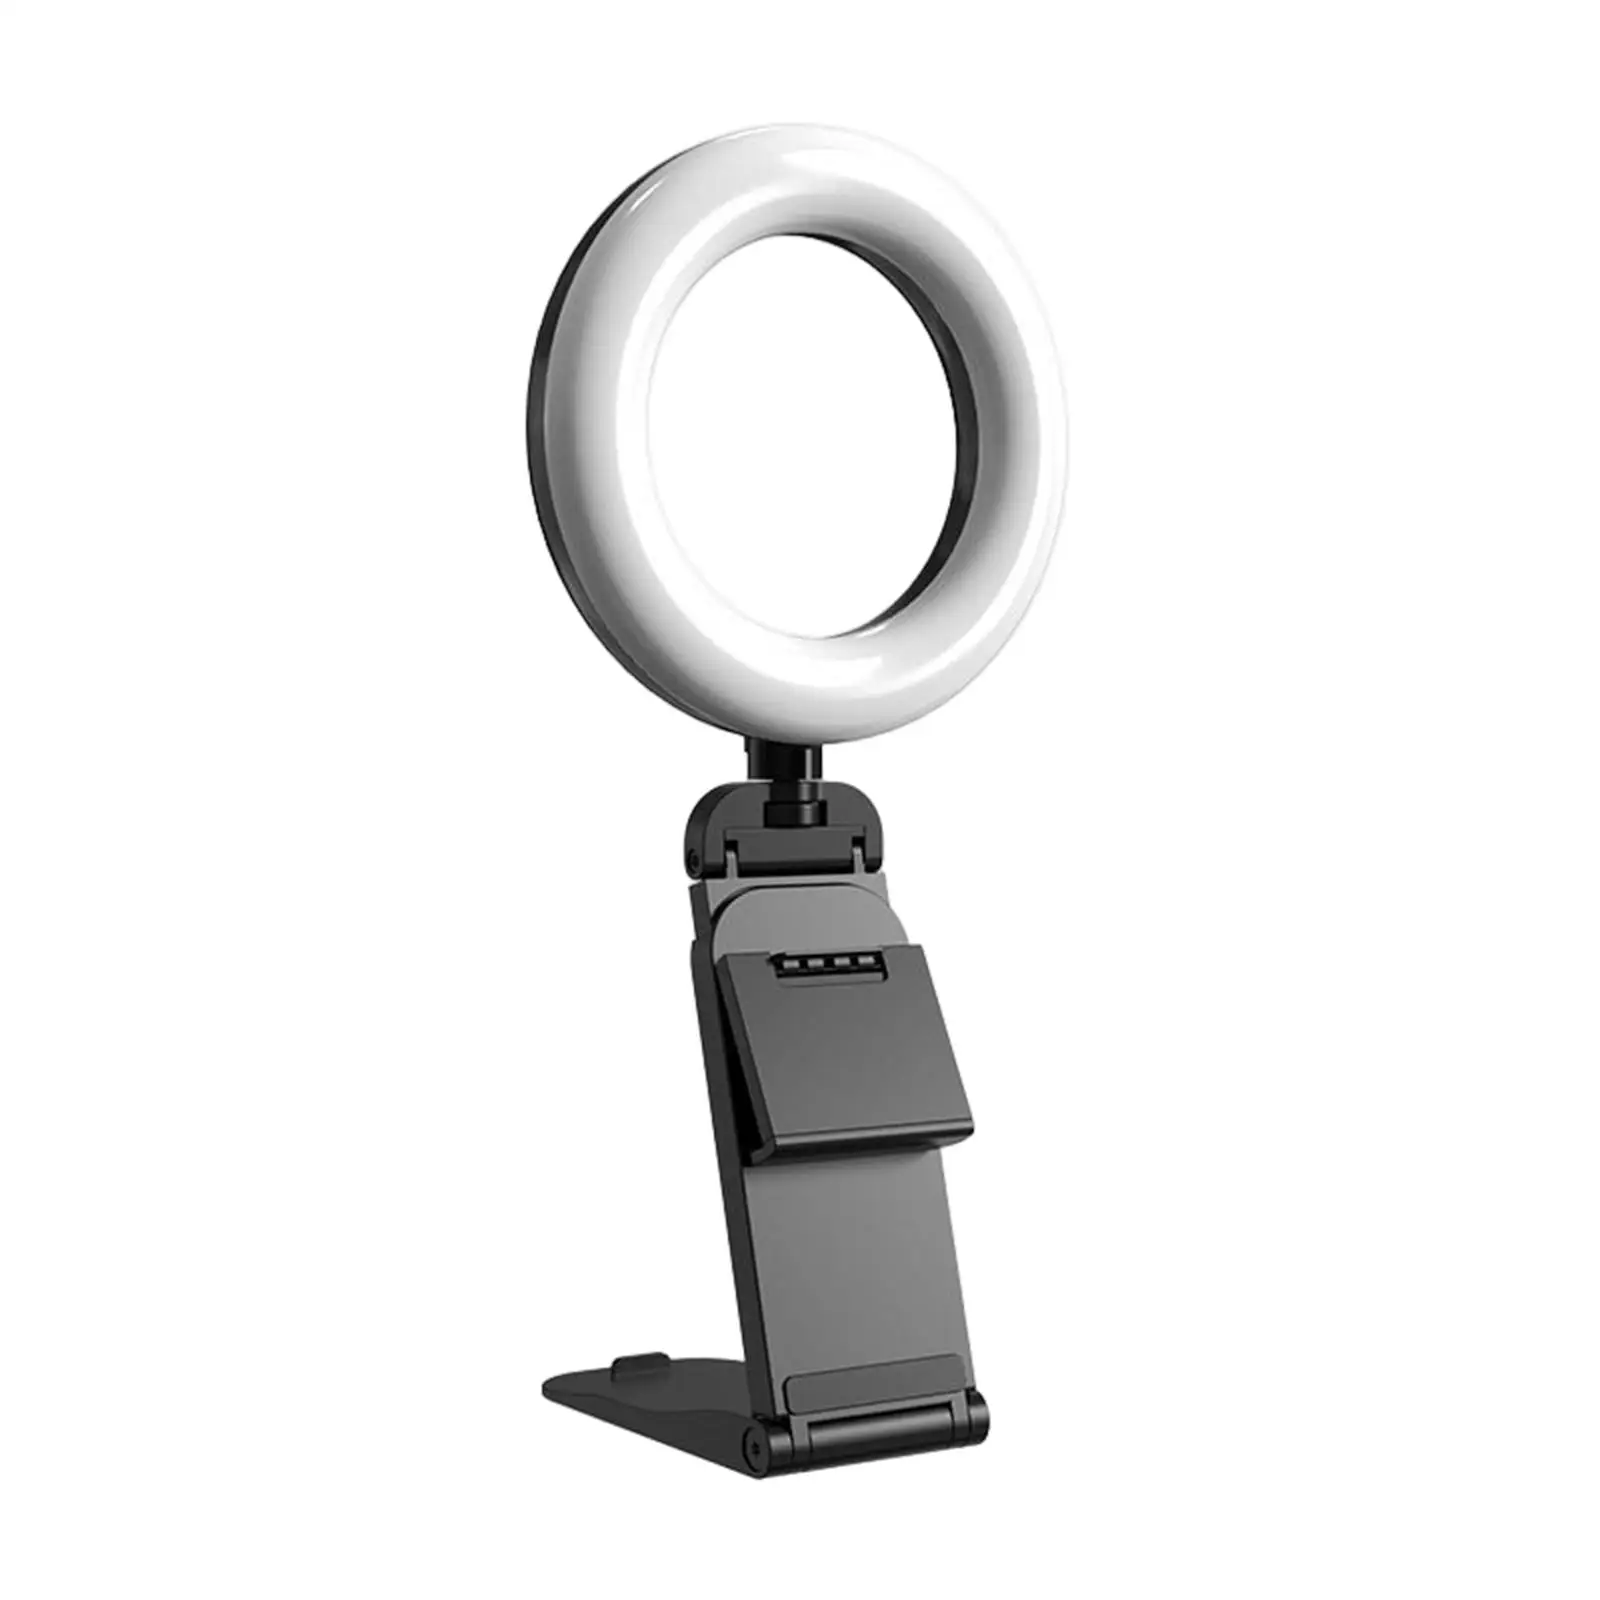 Video Conference Lighting Desktop Fill Light LED Selfie Light rings Light with Stand for Remote Working Distance Learning Makeup